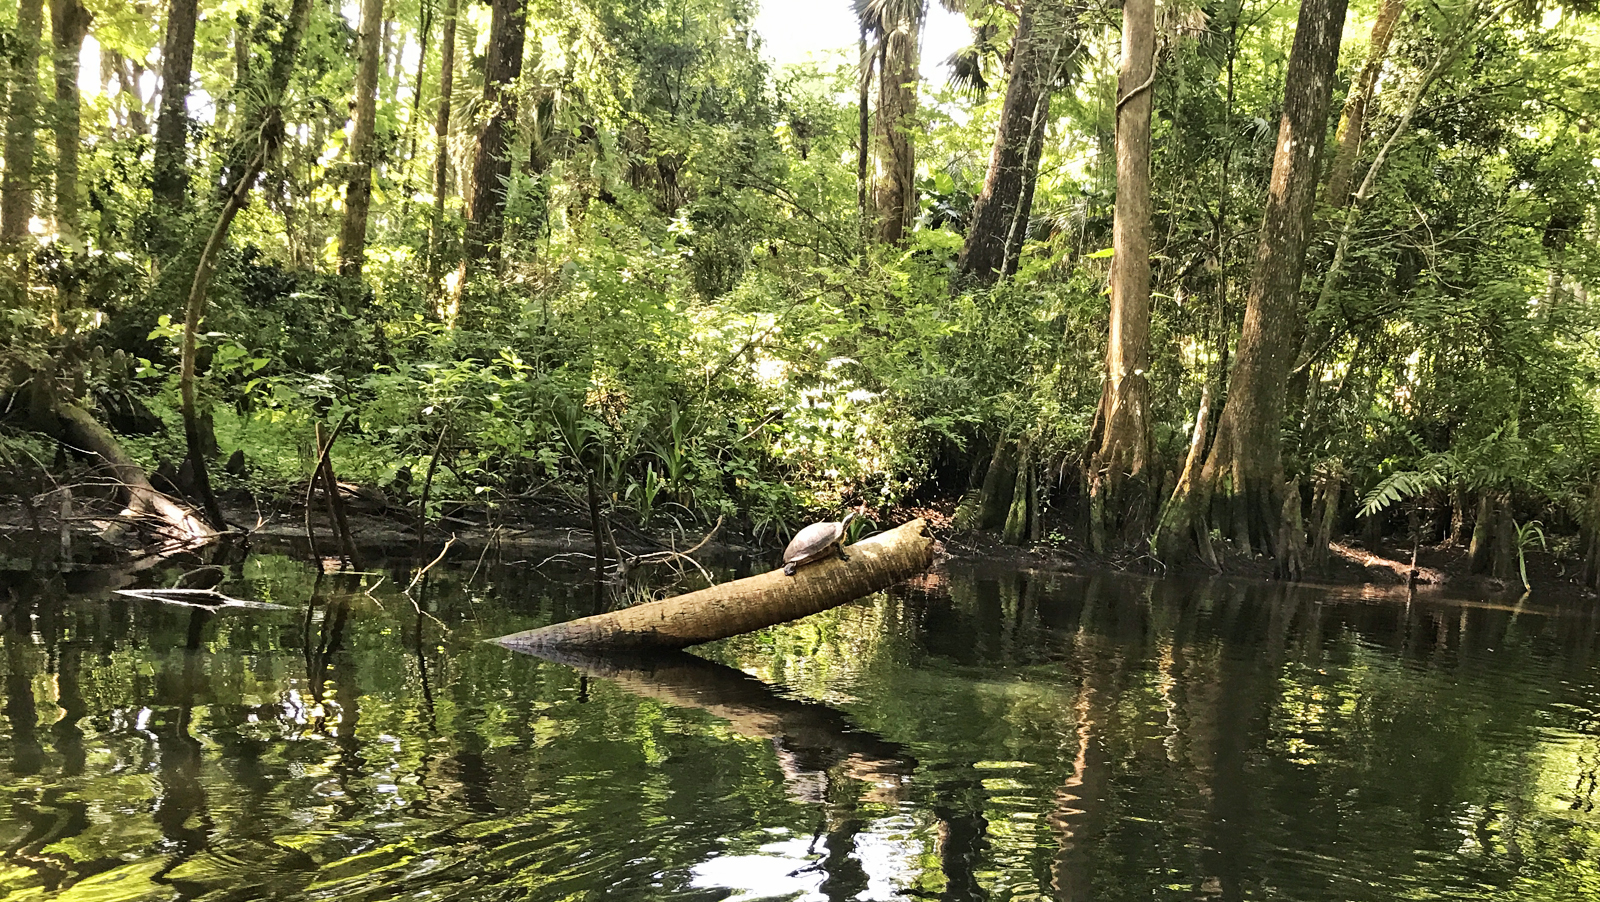 Loxahatchee River kayaking and turtle: Its name means "river of turtles." (Photo: Bonnie Gross)